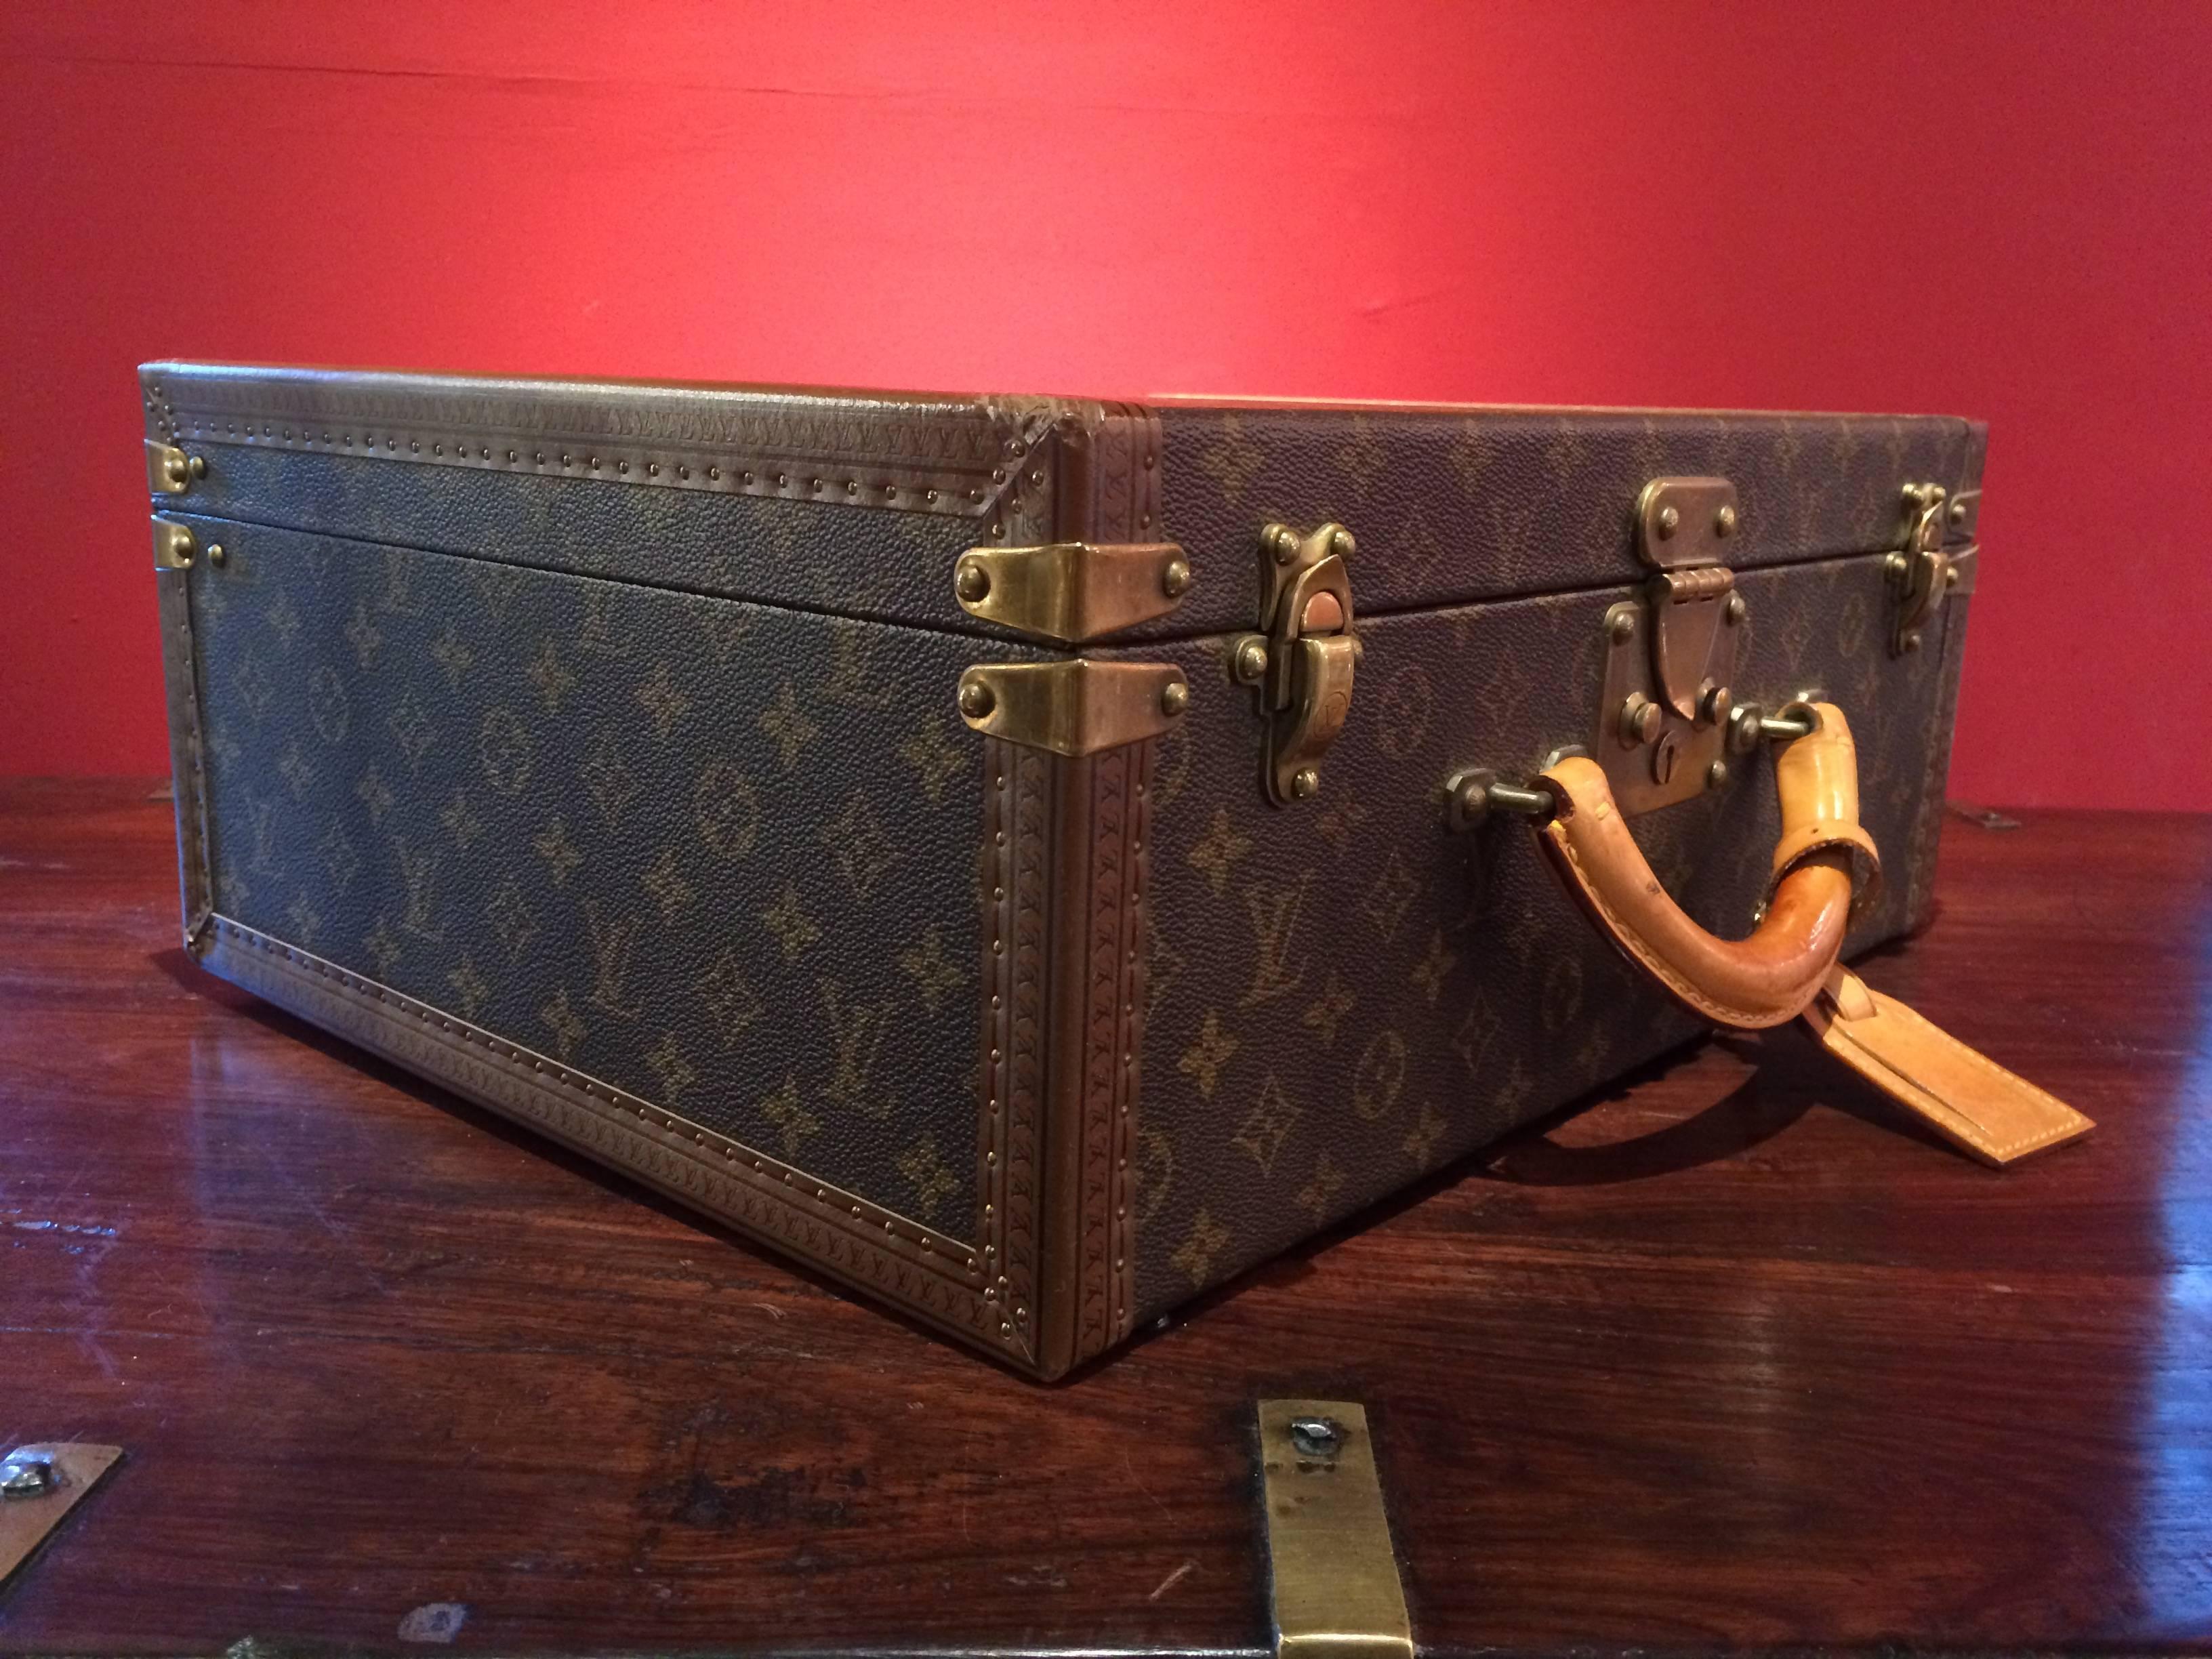 Original monogramed Bisten 70 Suitcase. 
Complete with luggage tag.
Complete with Original leather dividers inside.
Louis Vuitton serial number pictured.